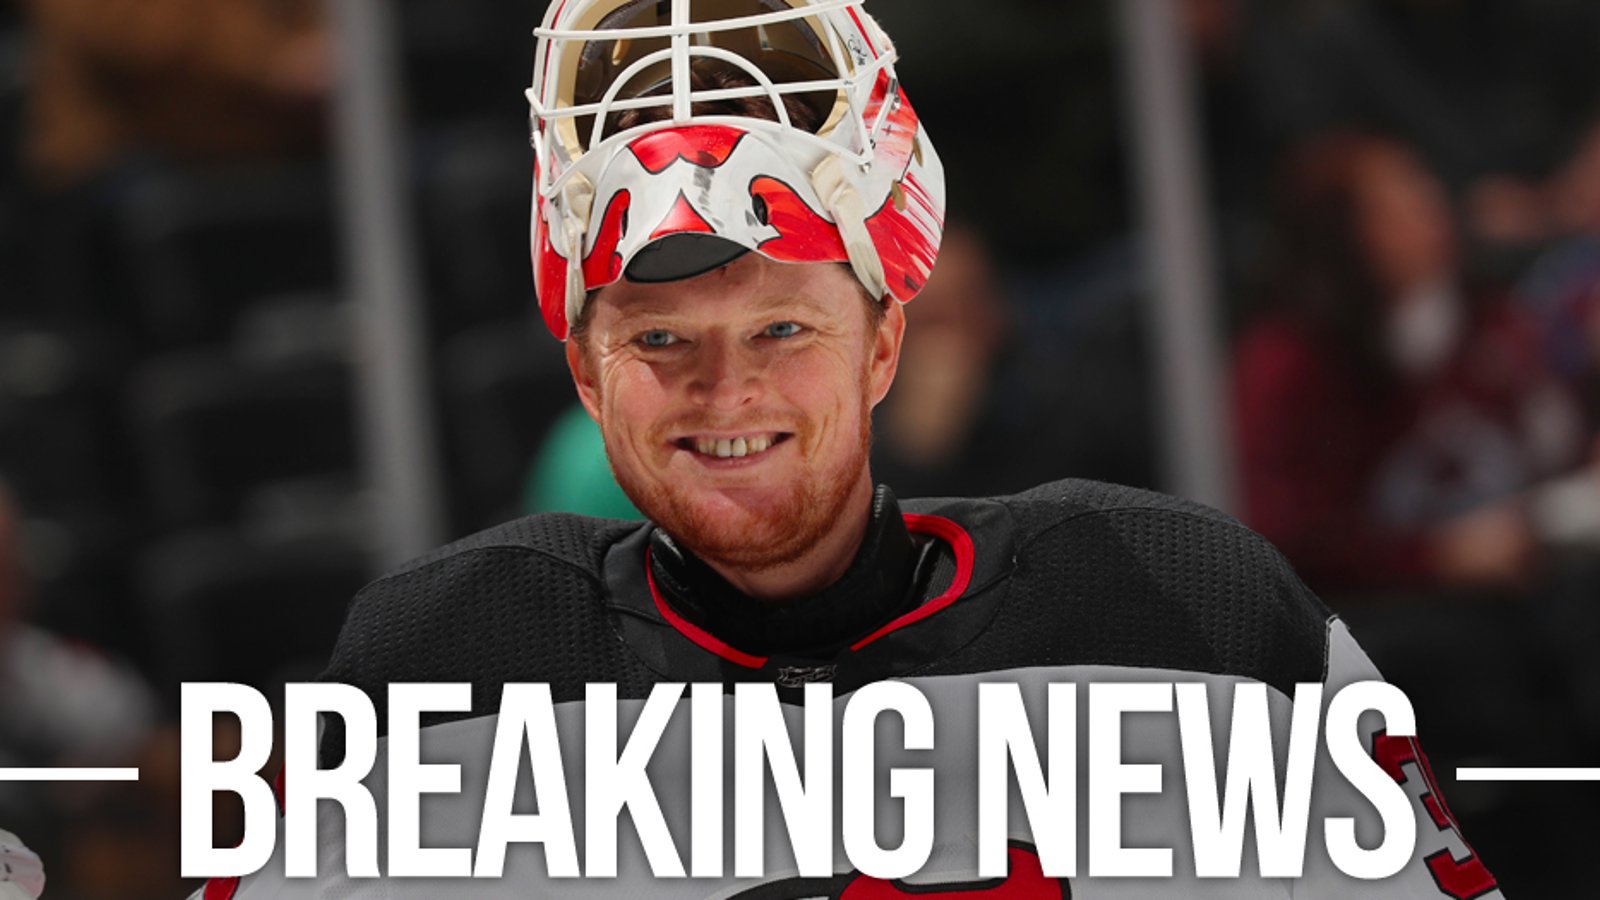 Cory Schneider gets a second chance at the NHL, signs one year deal in free agency